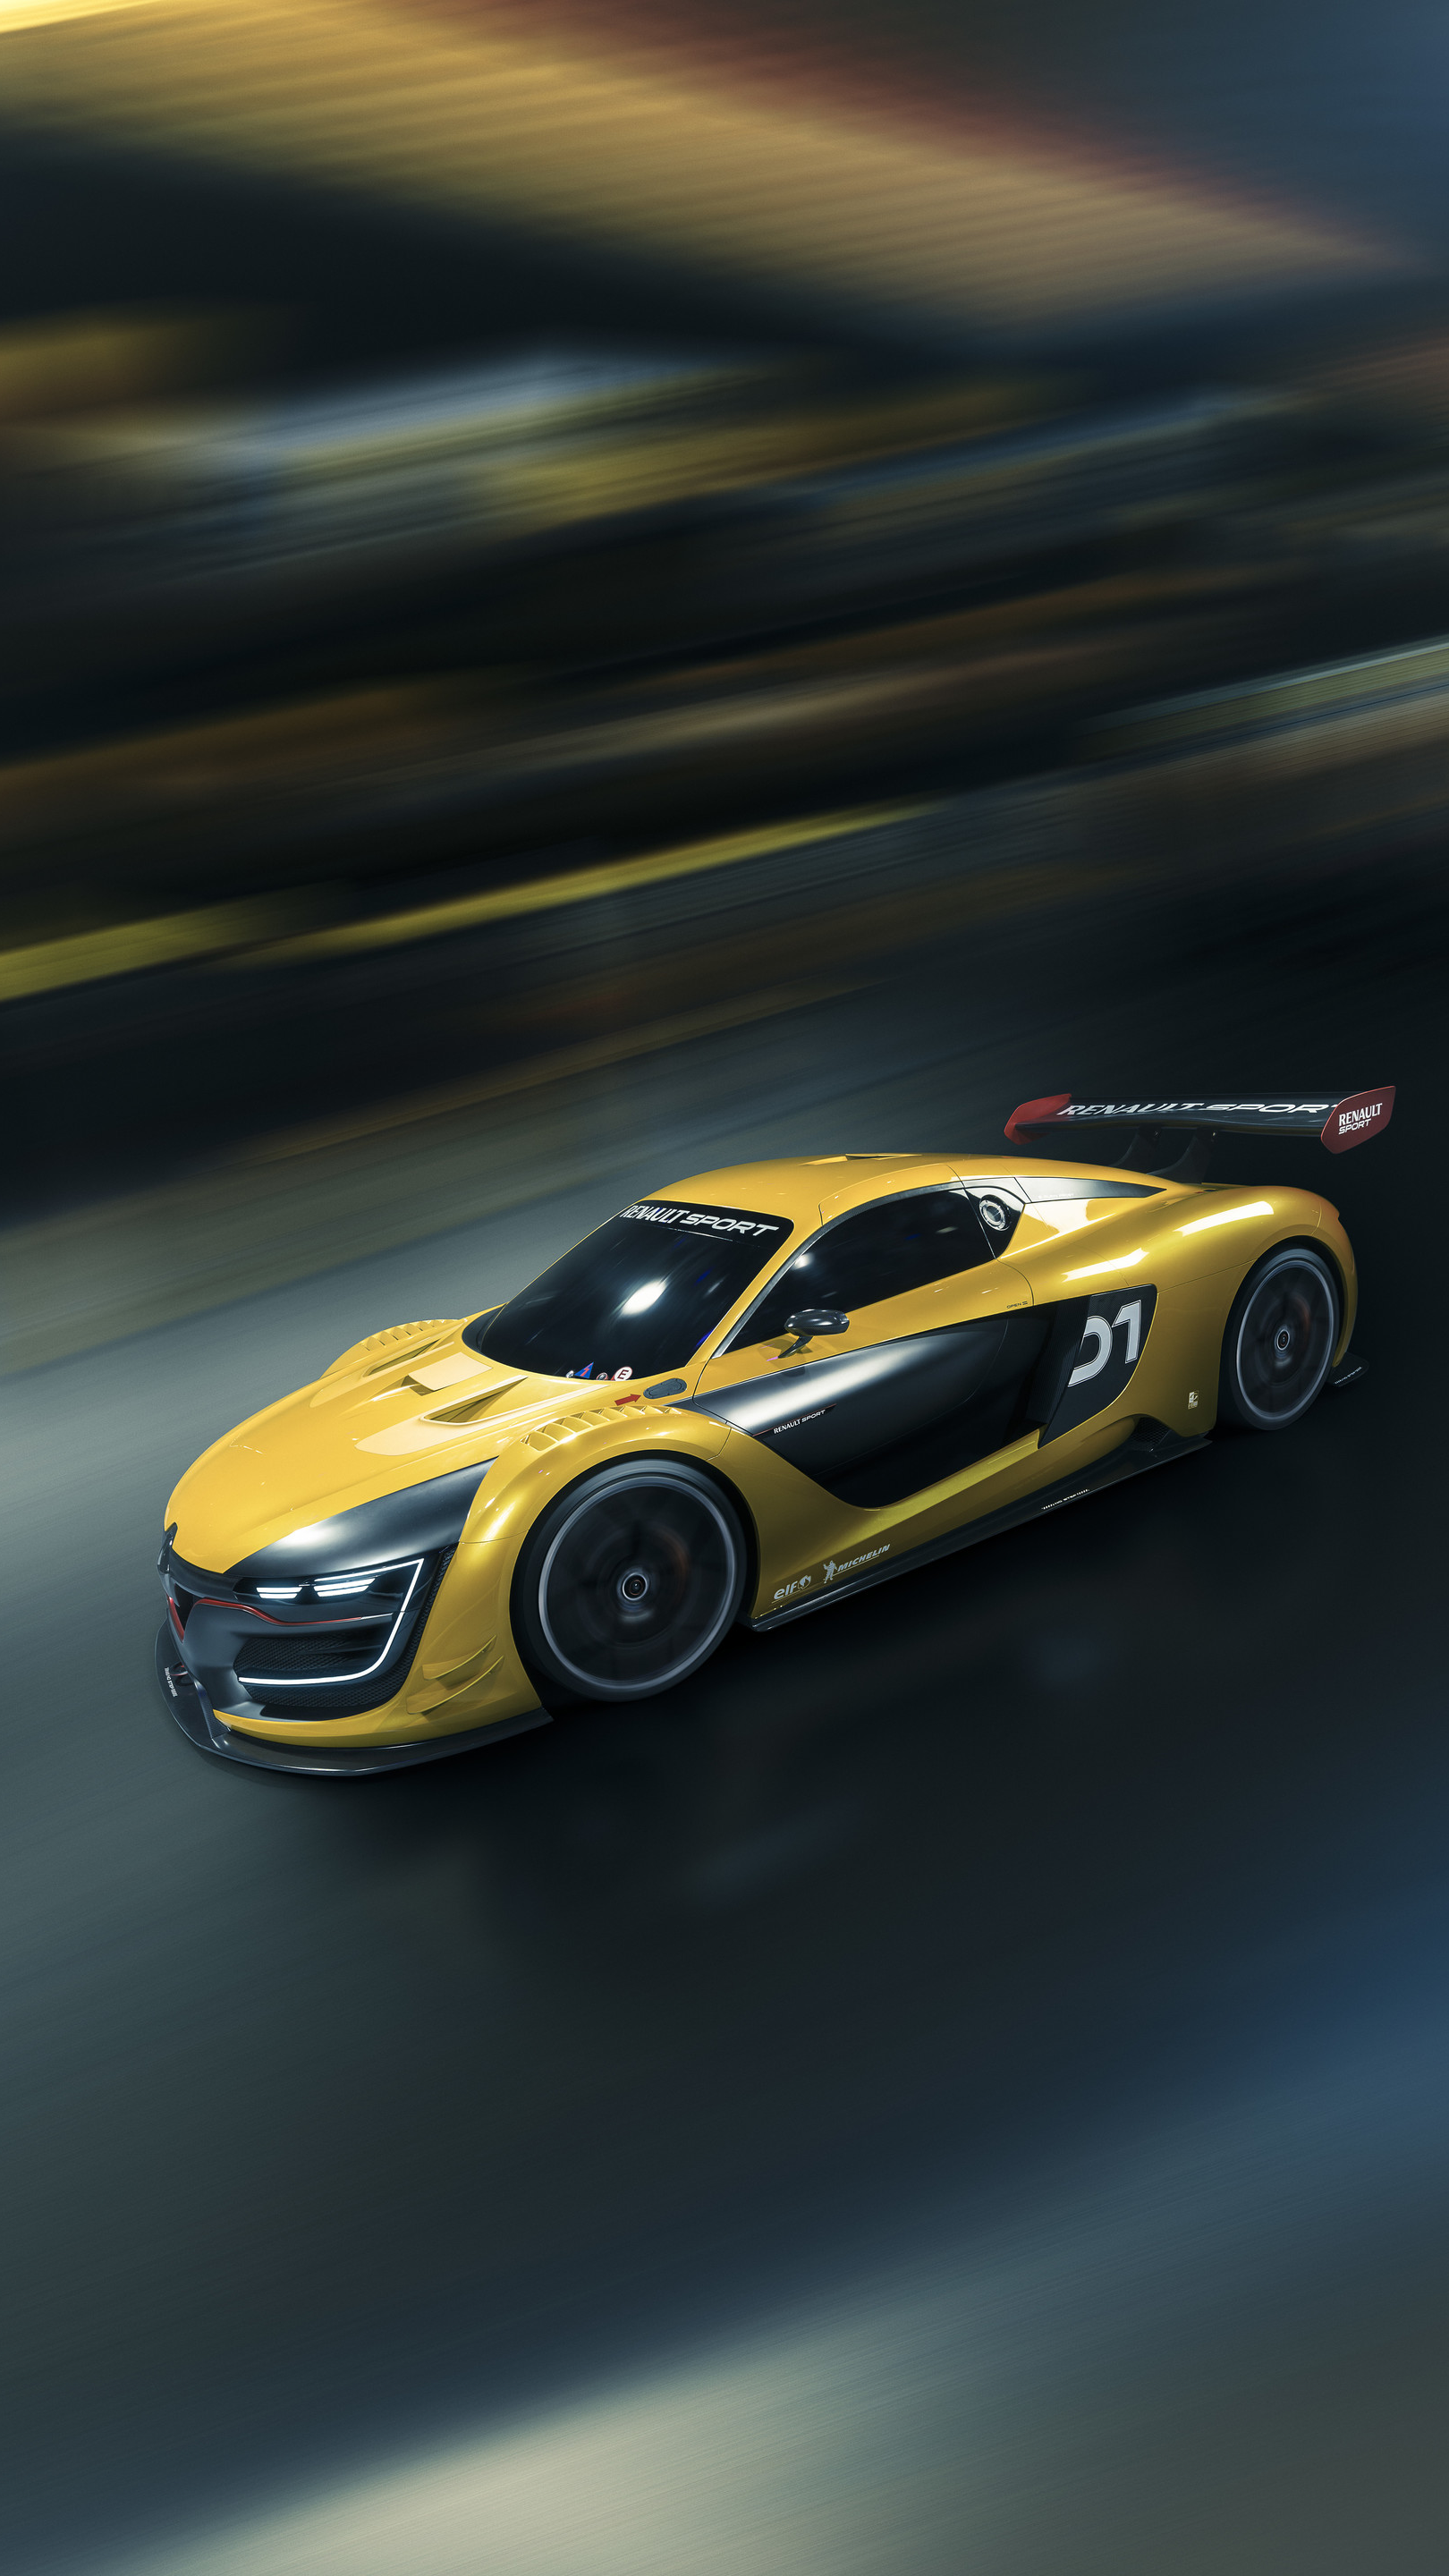 General 1620x2880 Renault Sport R.S. 01 car vehicle race cars motion blur race tracks portrait display Renault yellow cars French Cars car spoiler